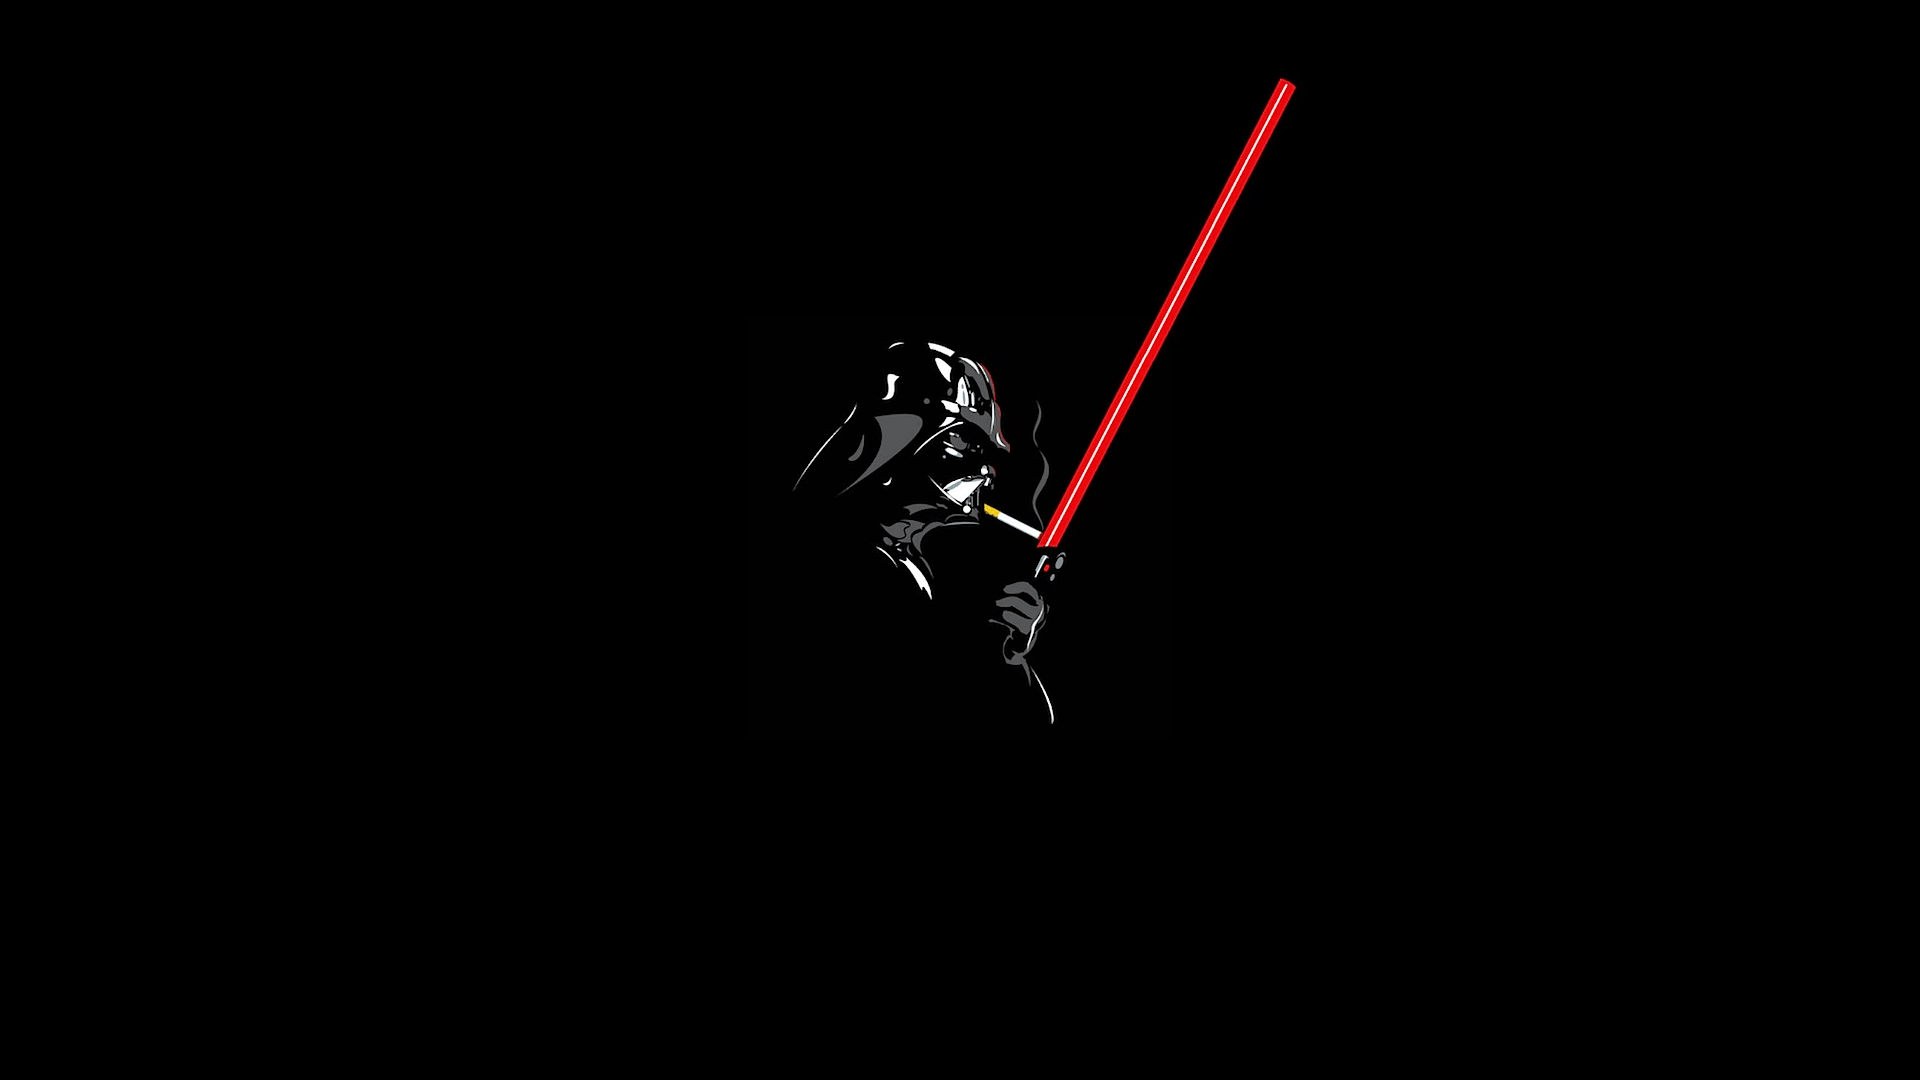 Simple Star Wars Wallpapers Top Free Simple Star Wars Backgrounds Wallpaperaccess